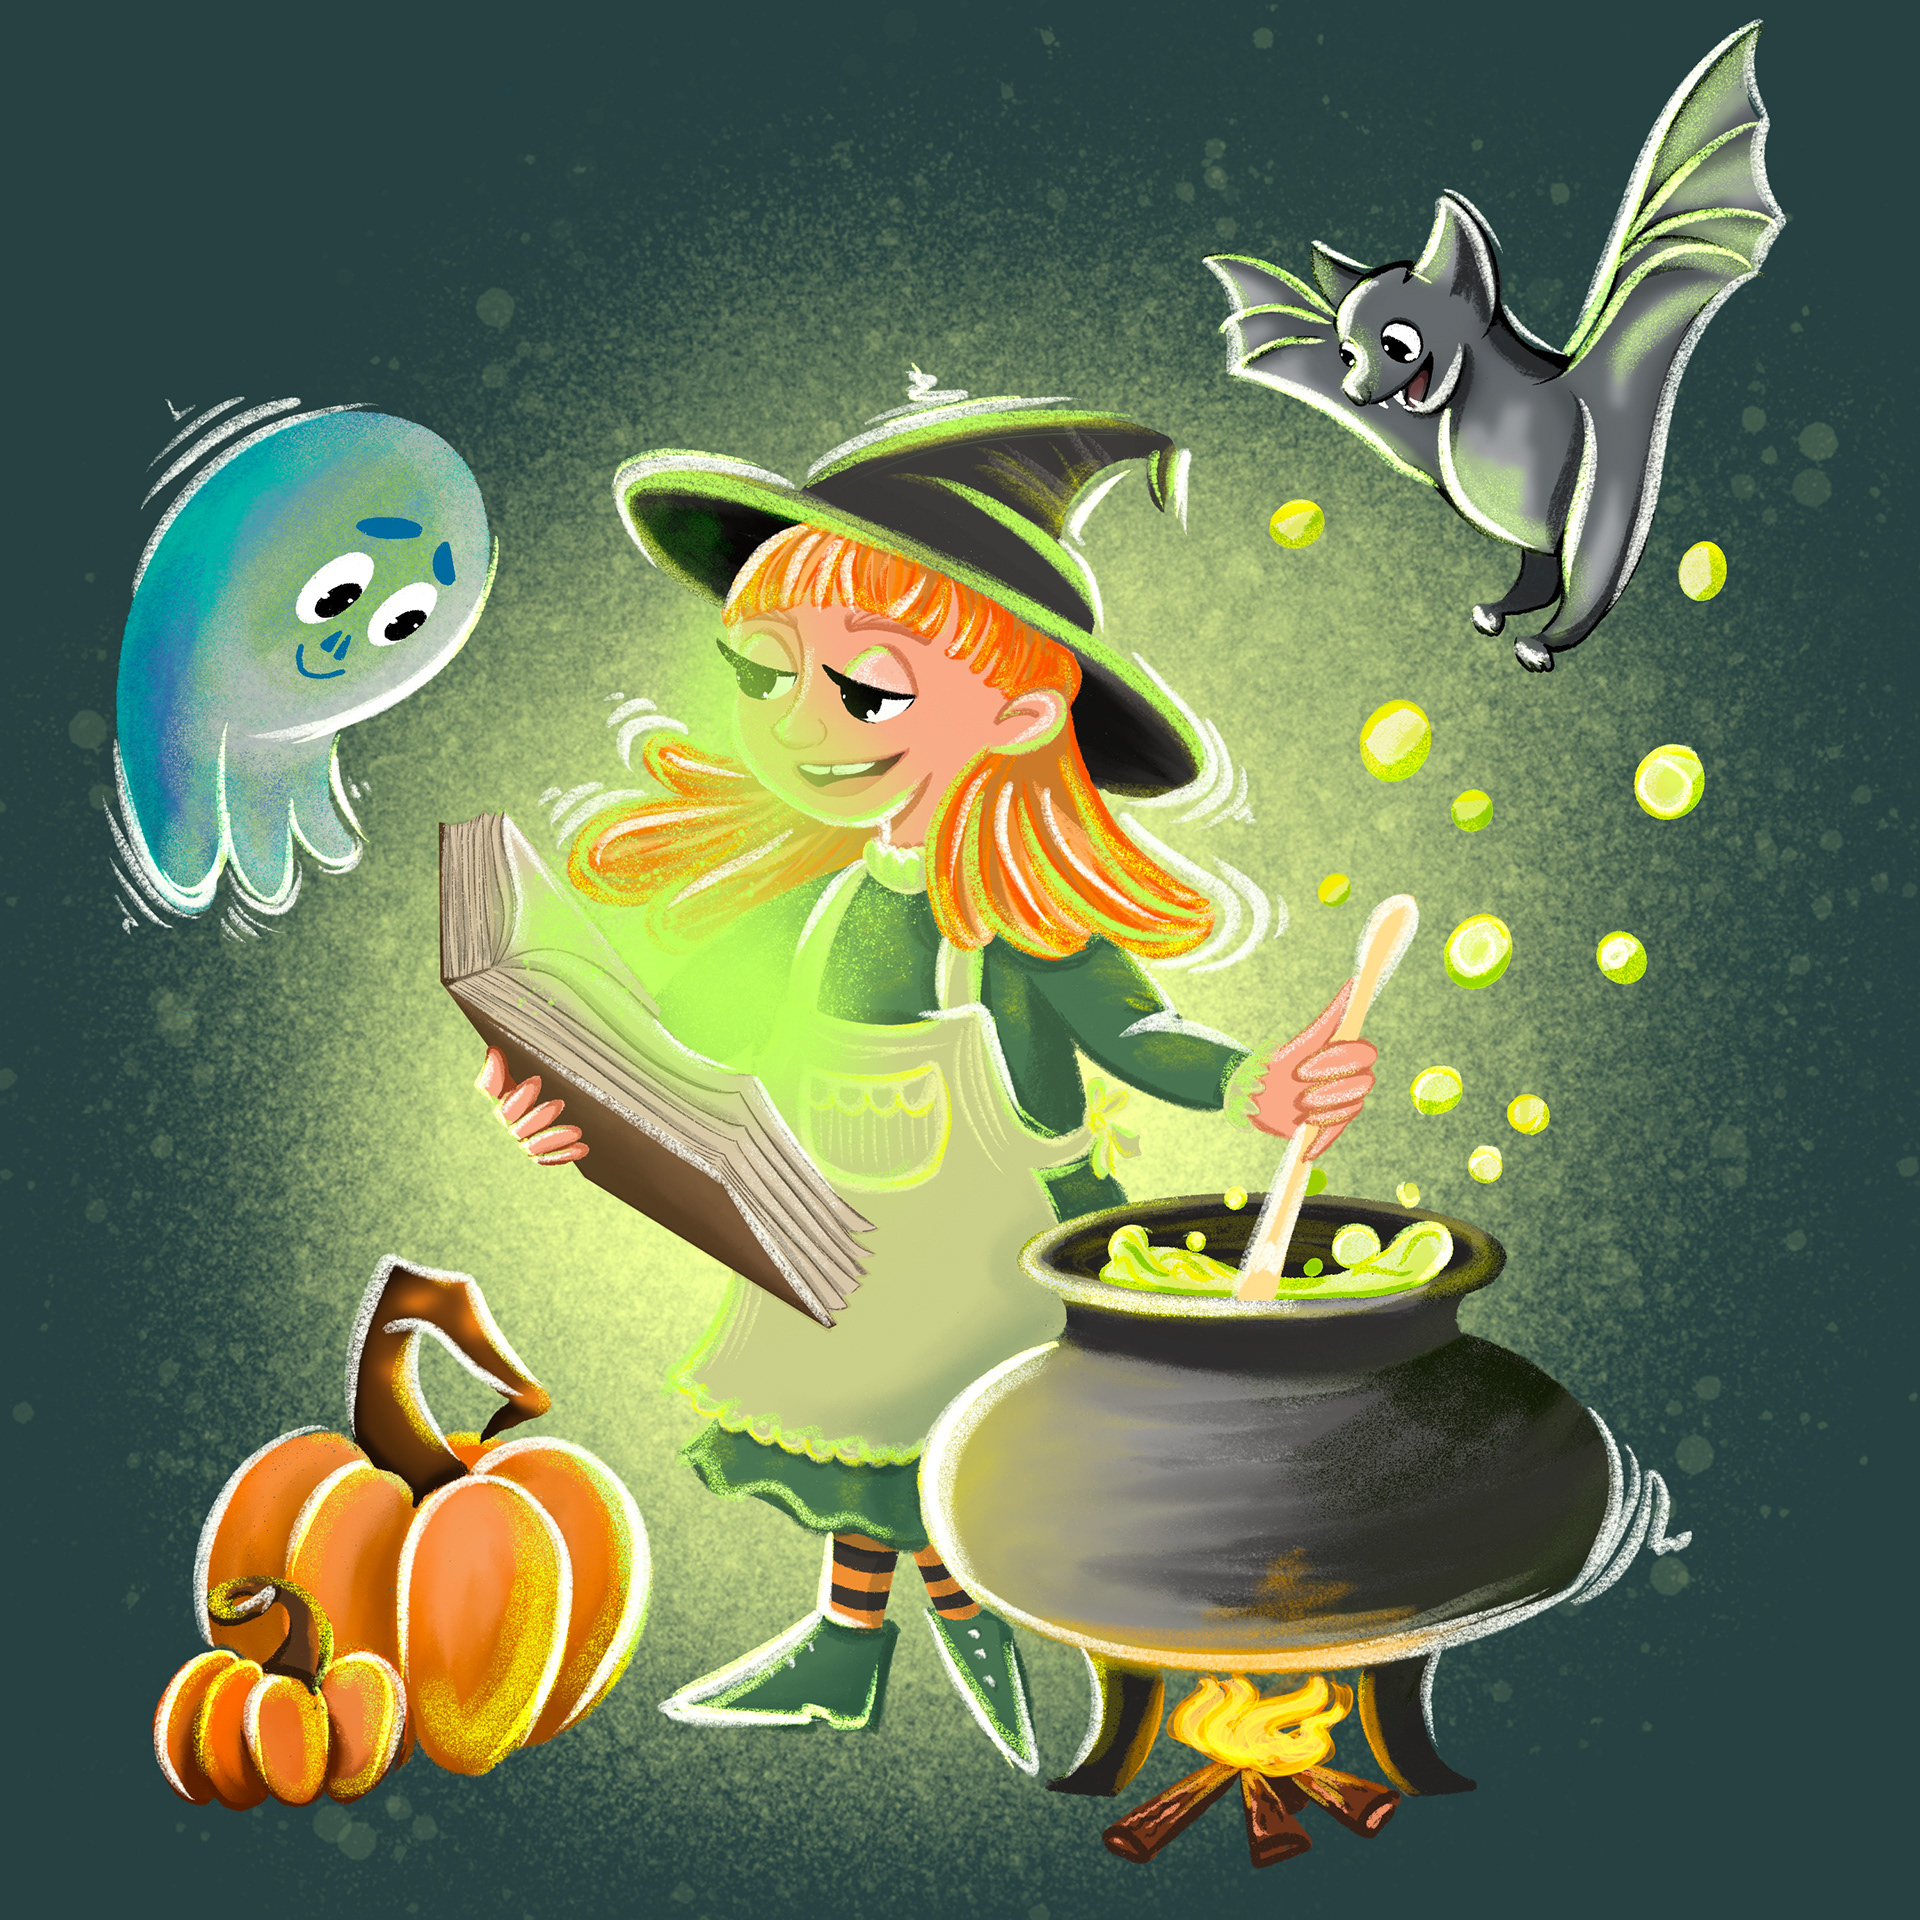 This illustration is about the little witch Amber. Amber prepares a treat for the Halloween celebrat